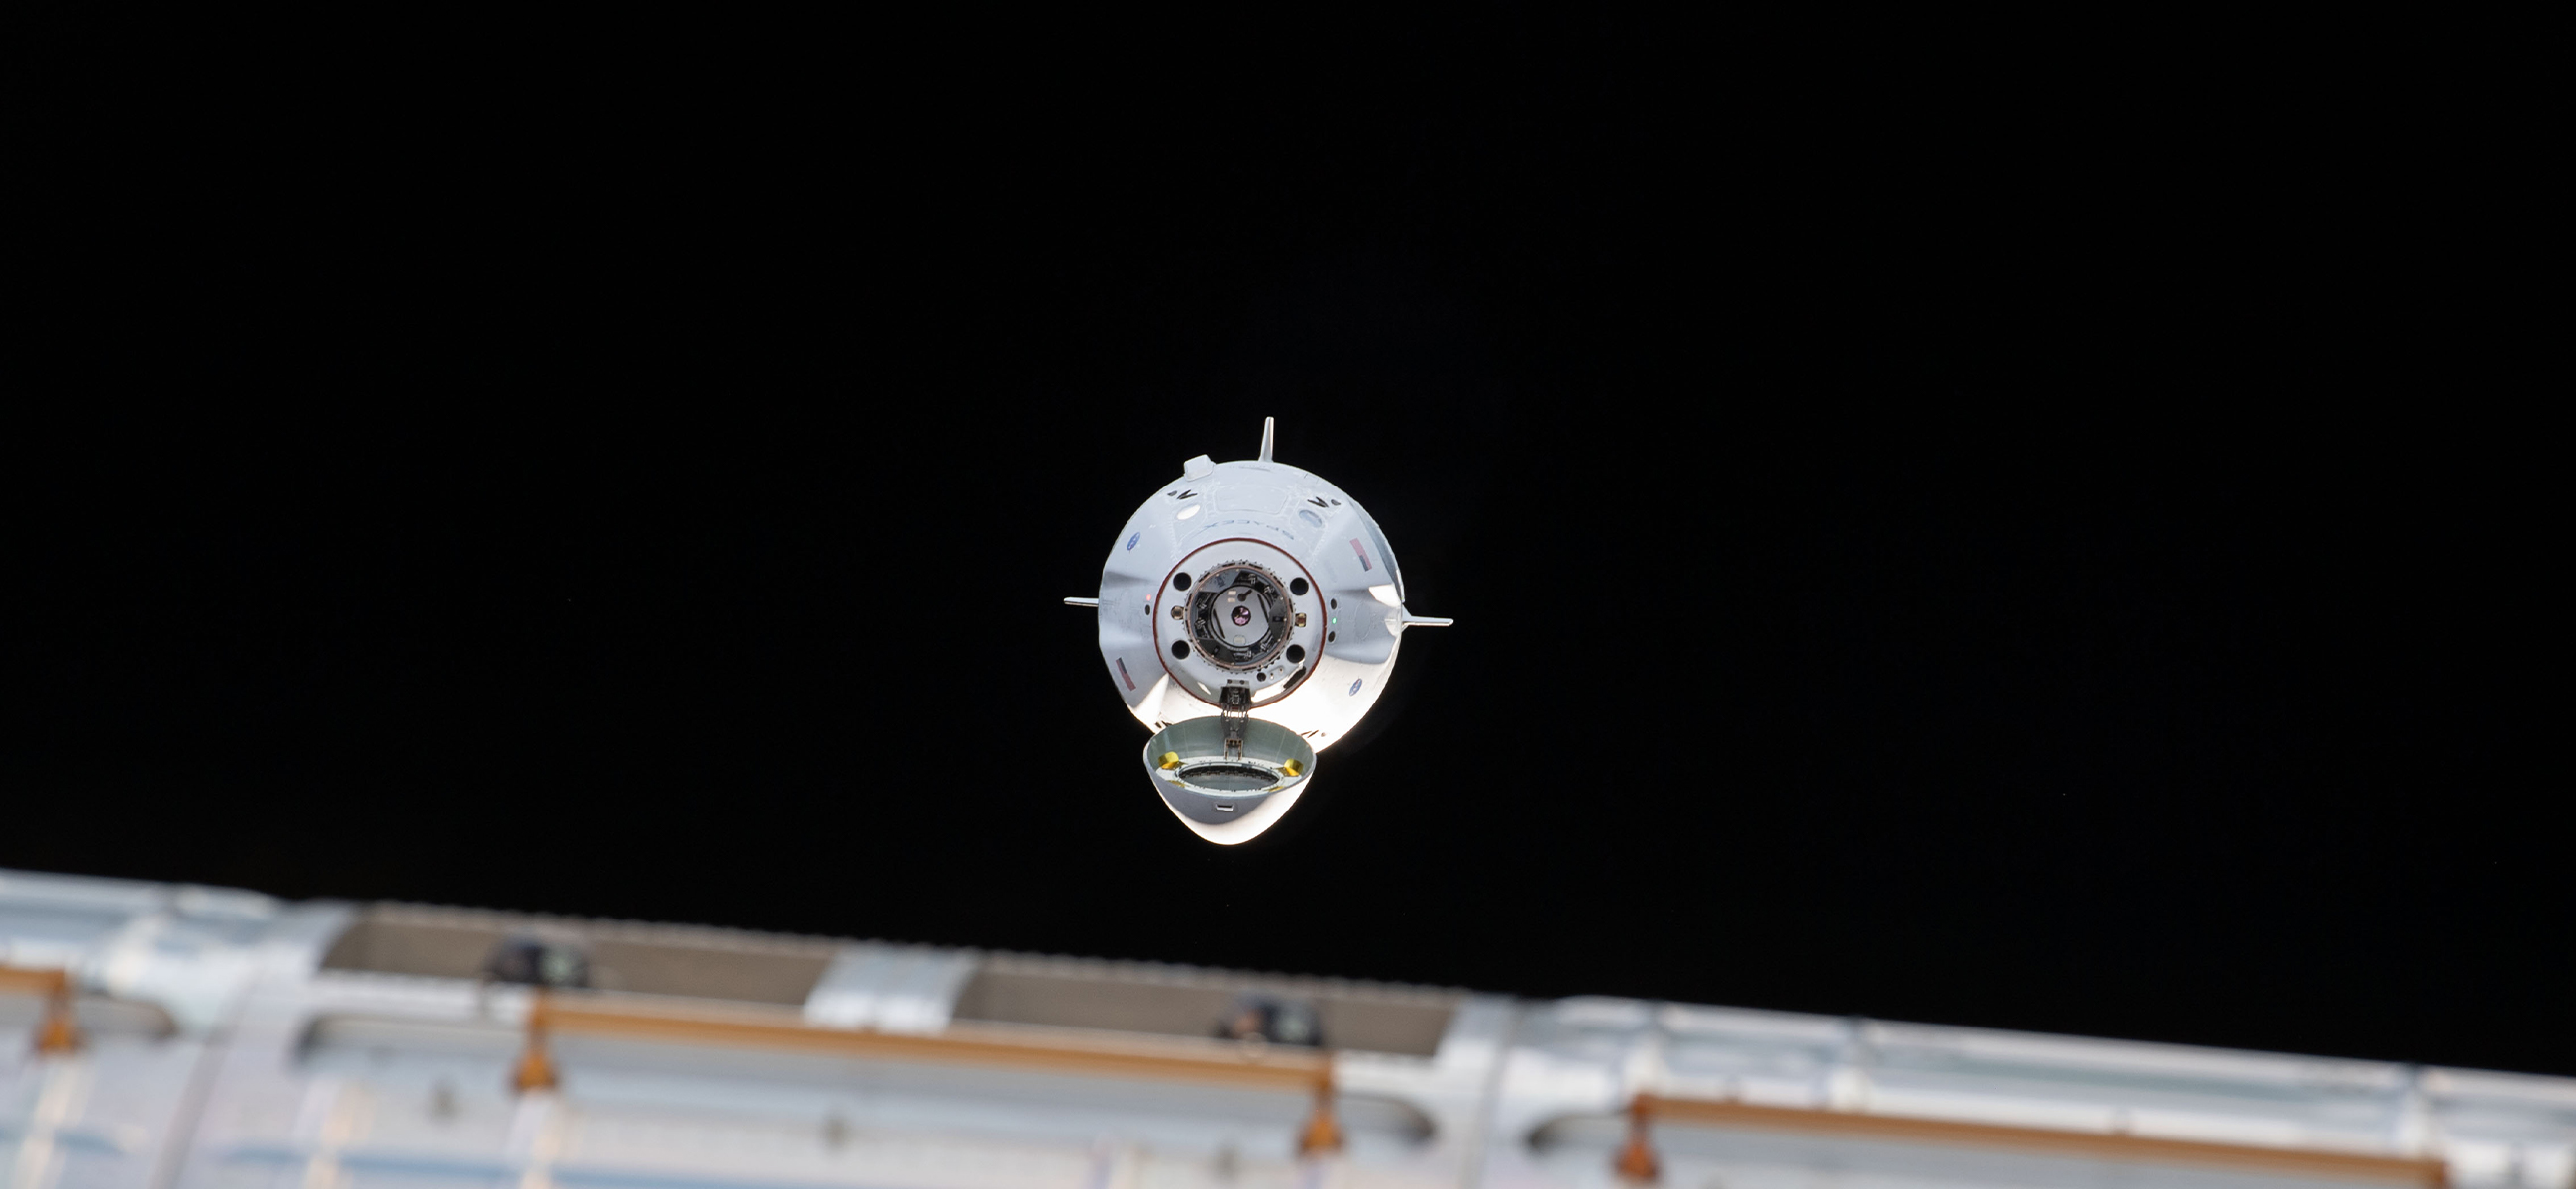 SpaceX Crew Dragon approaching the ISS.